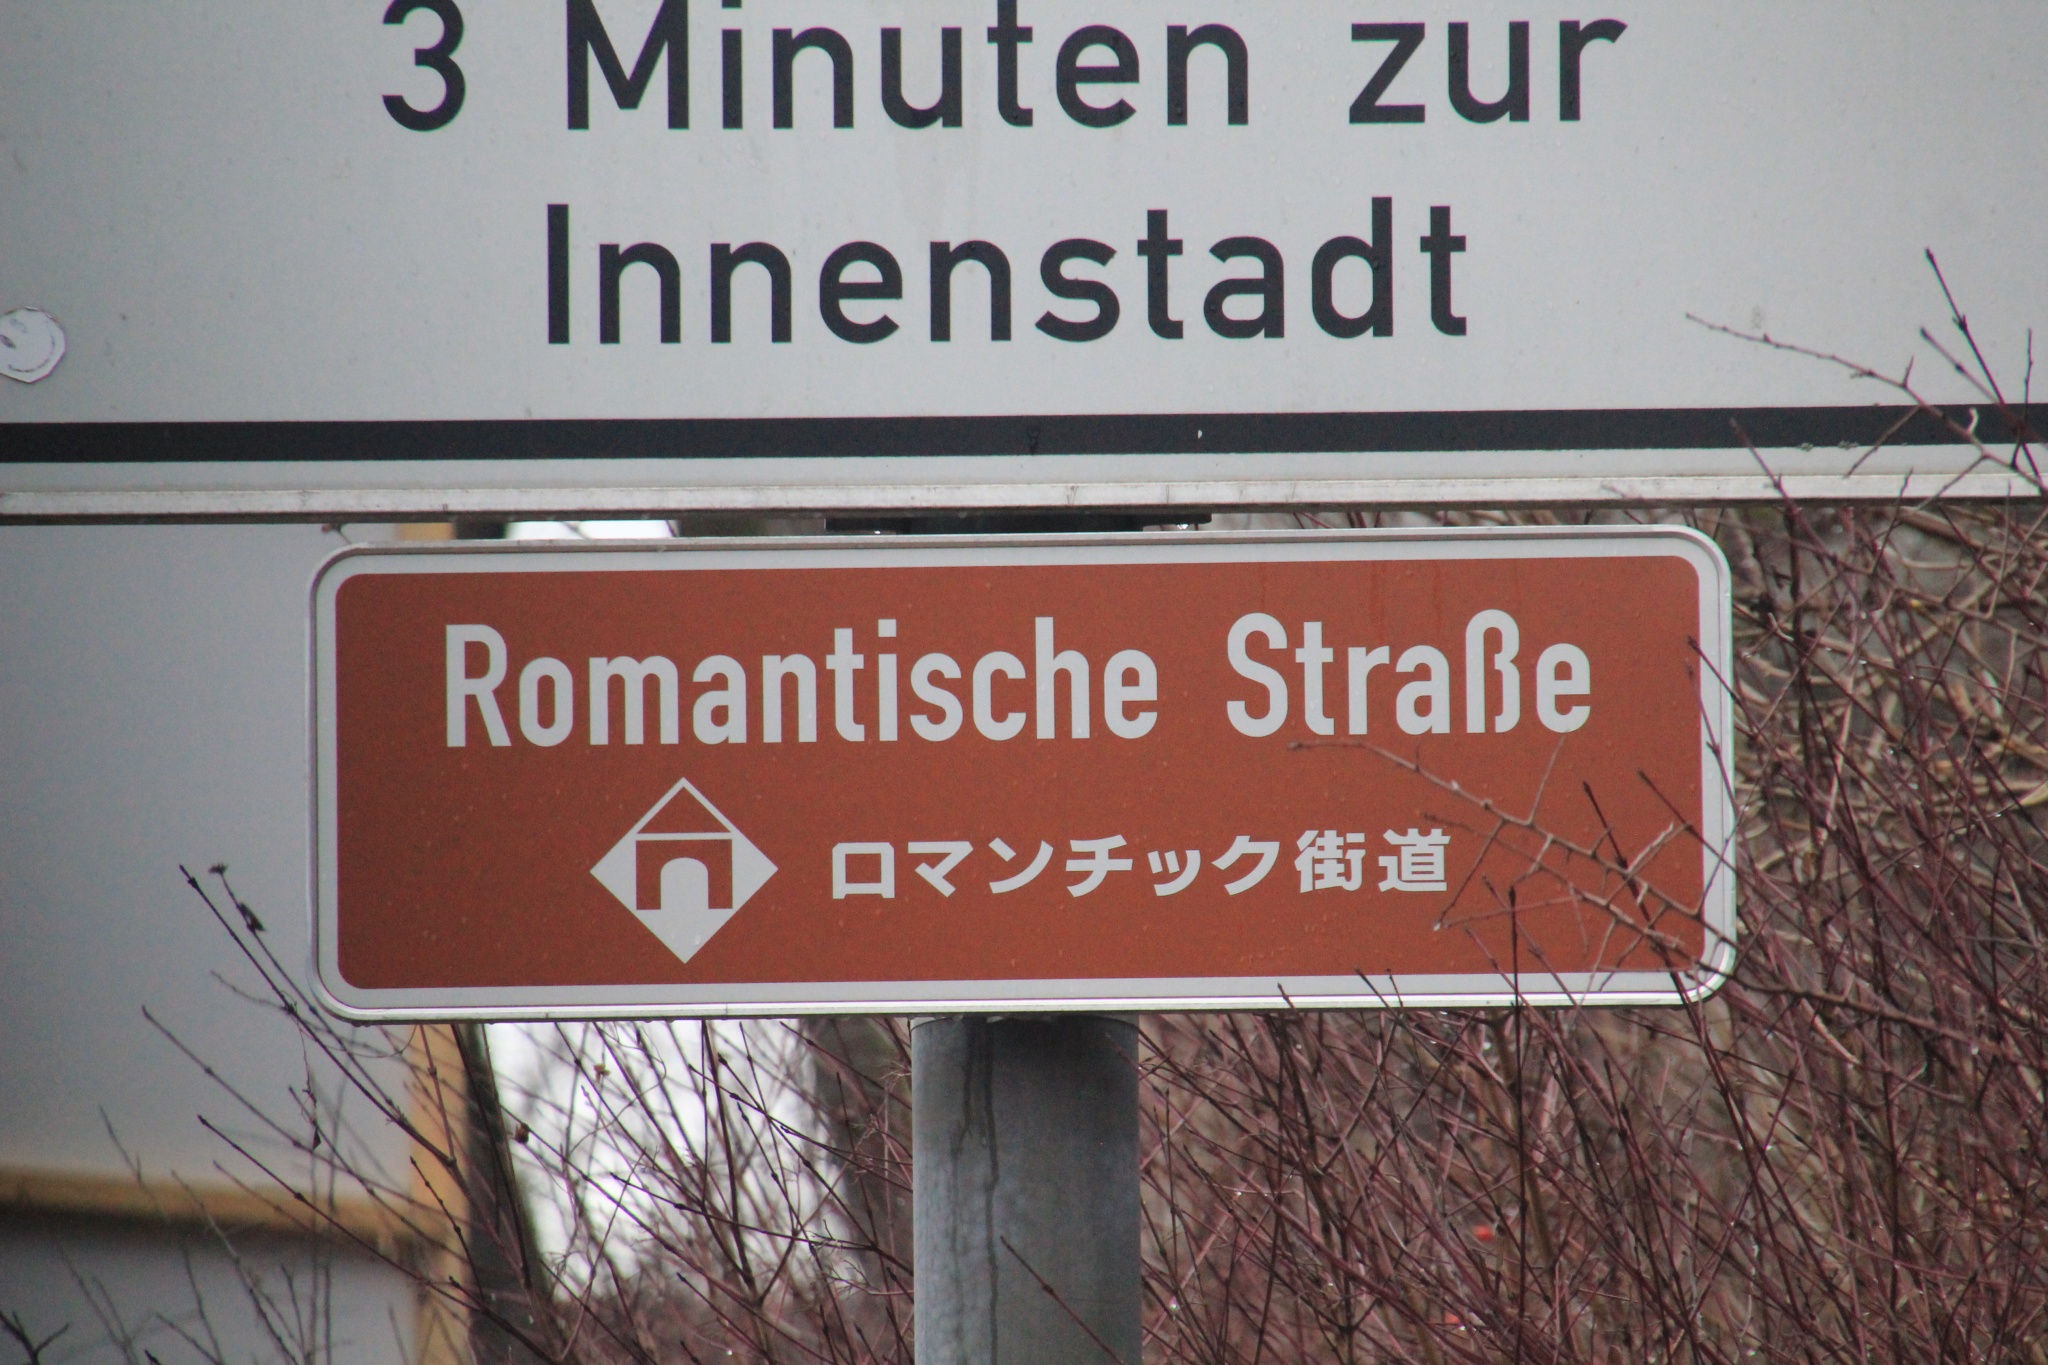 The Romantic Road is a 350-kilometer highway route in Germany between W&uuml;rzburg and F&uuml;ssen that links 27 medieval towns.